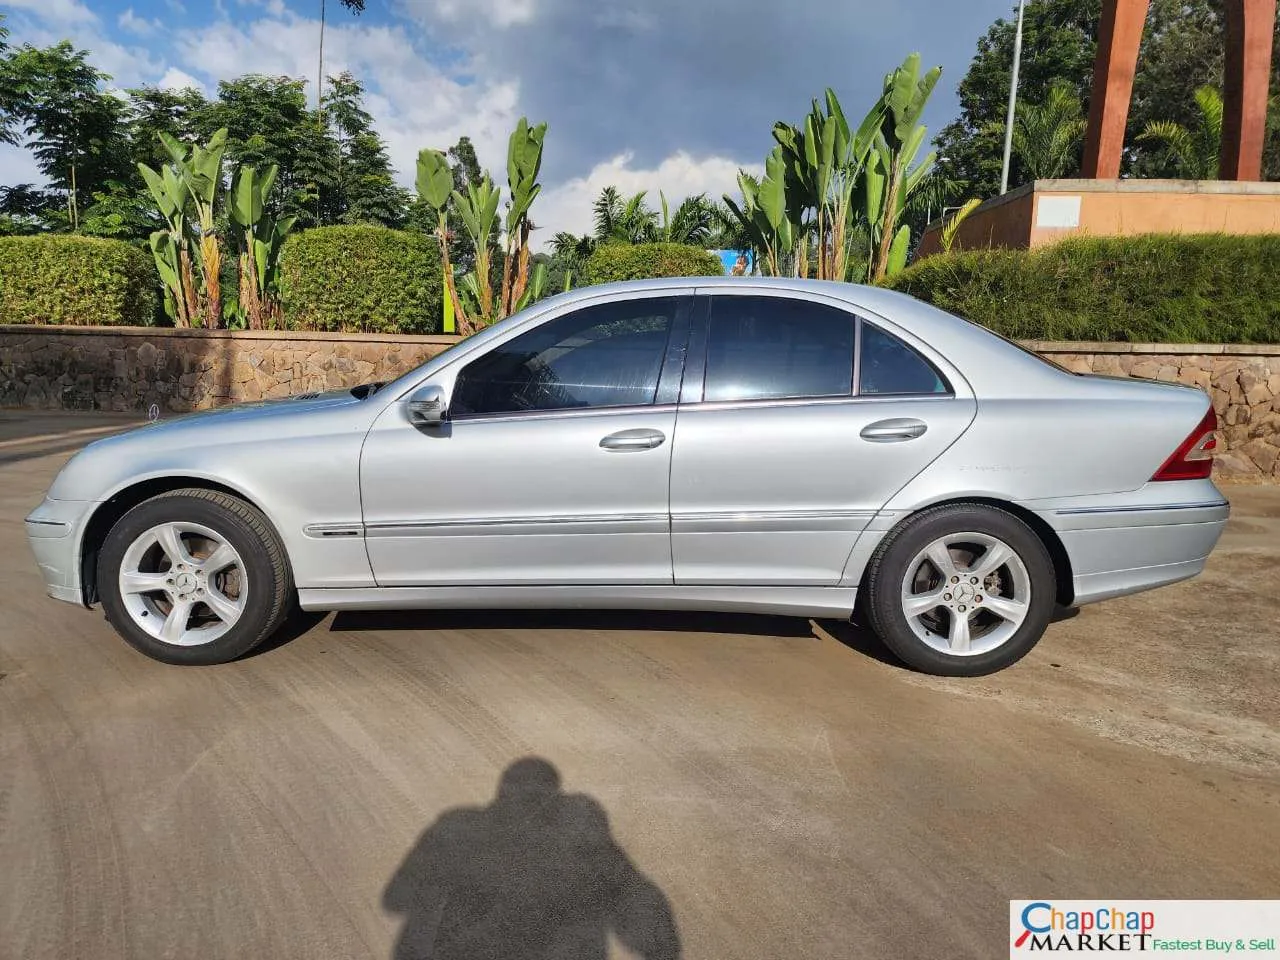 Mercedes Benz C180 for sale in Kenya 🔥 You Pay 30% DEPOSIT Trade in OK EXCLUSIVE